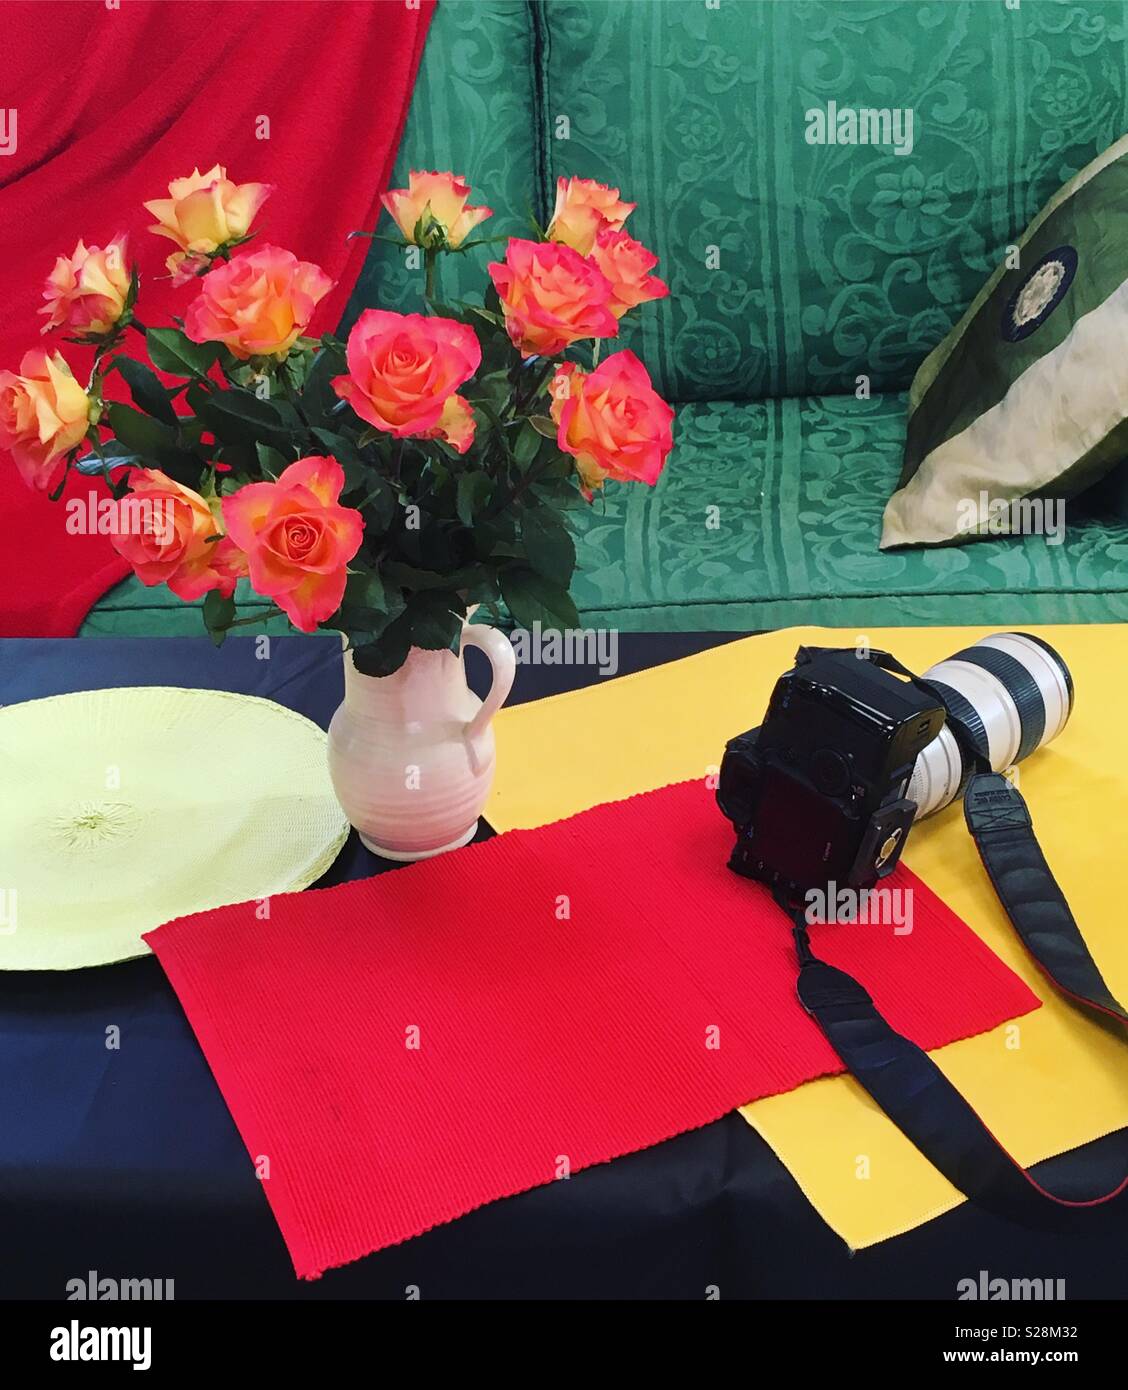 Red and yellow roses in vase on table with colourful placement mats and Canon camera. Stock Photo